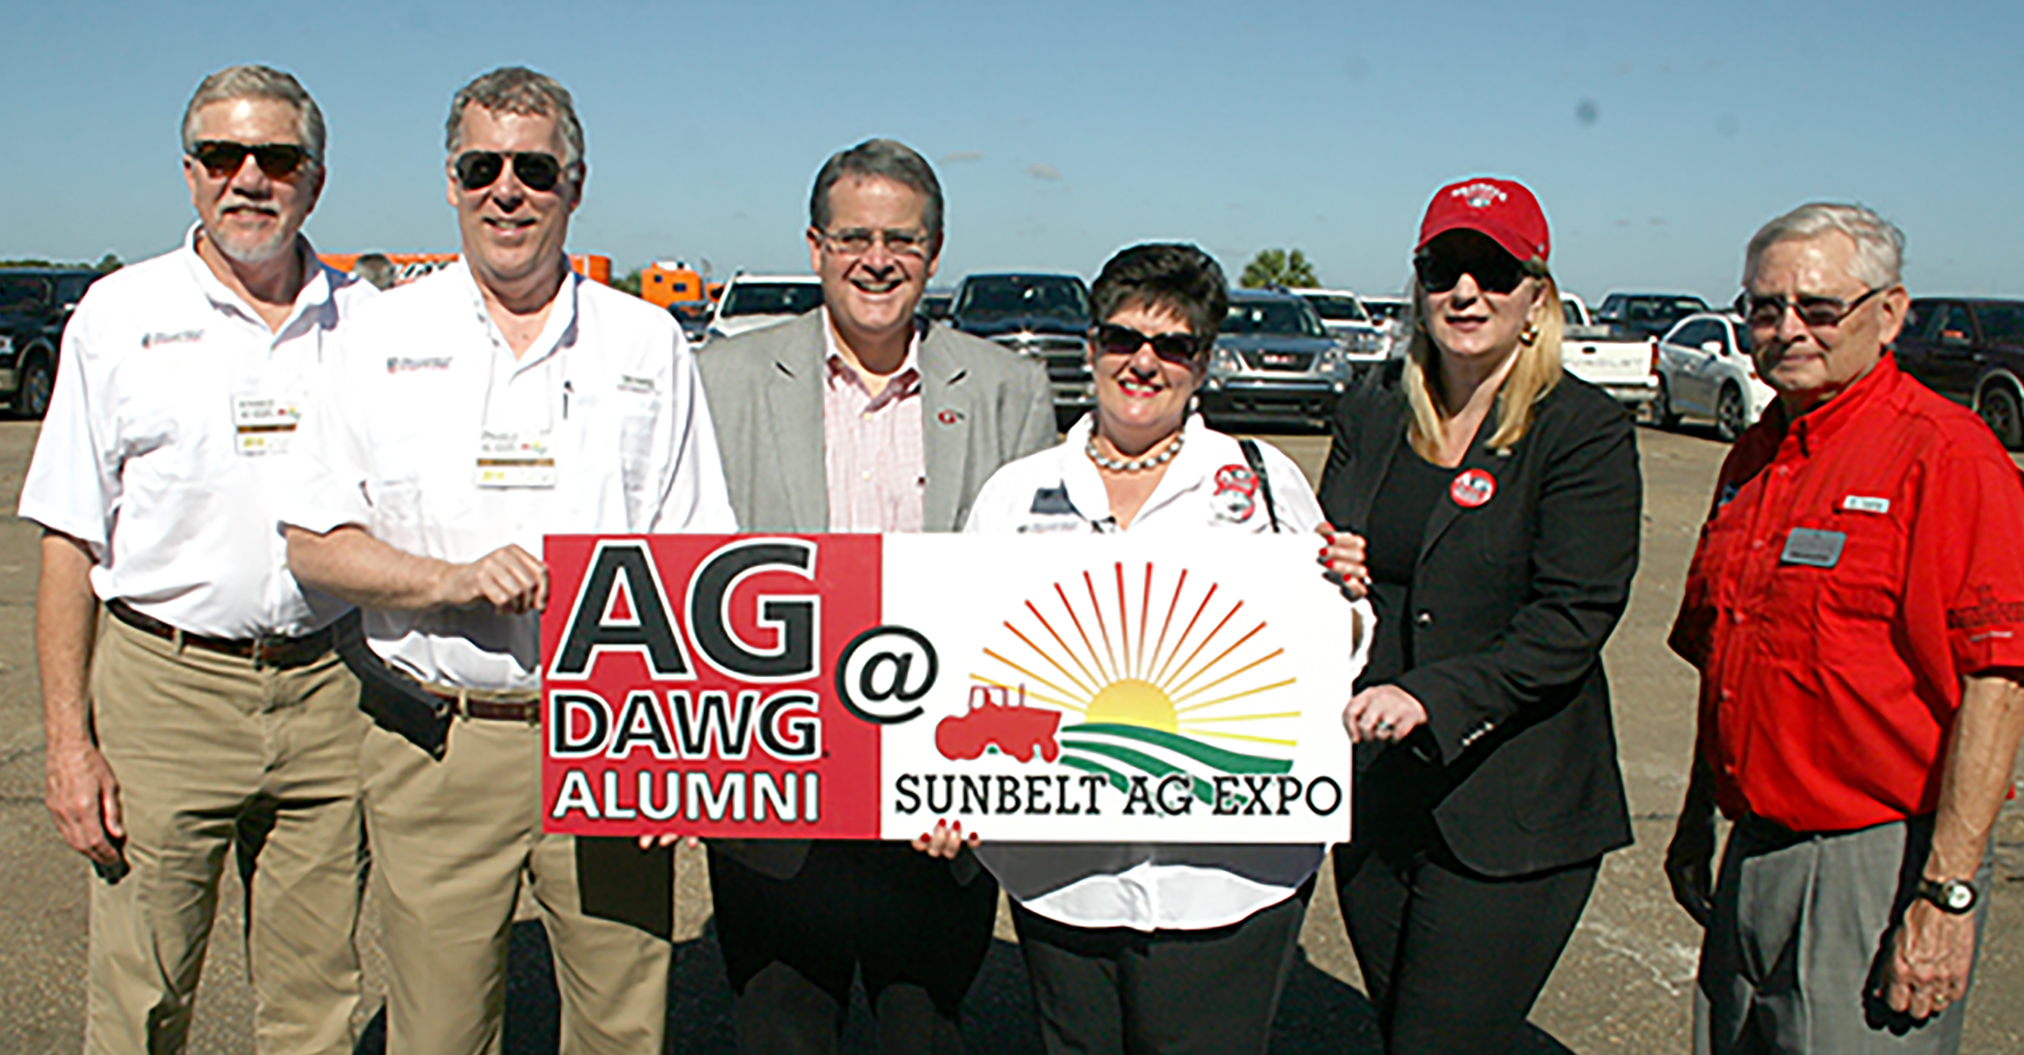 UGA administrators at the Sunbelt Expo in Moultrie, Georgia, on Oct. 18, 2016.